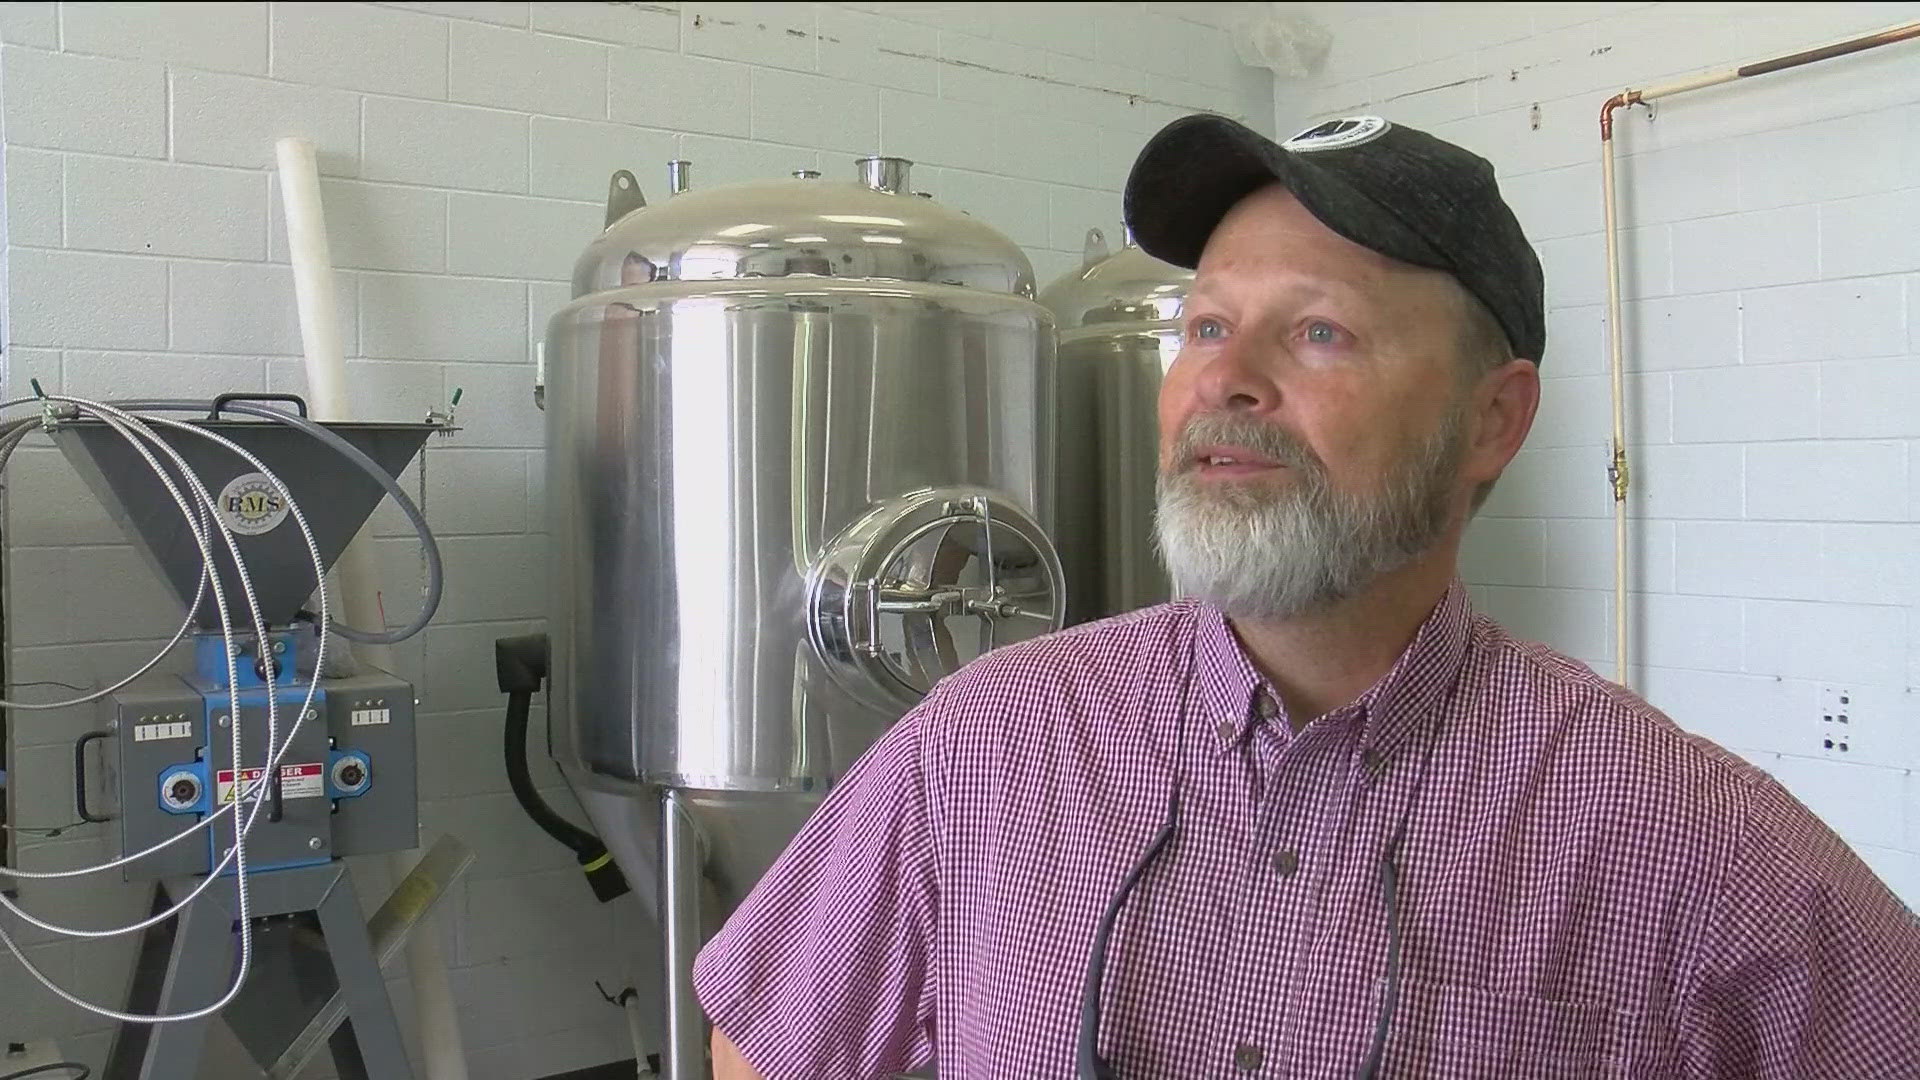 Located at the intersection of Seaman and South Wynn roads in Oregon, it will be the first microbrewery in the city.